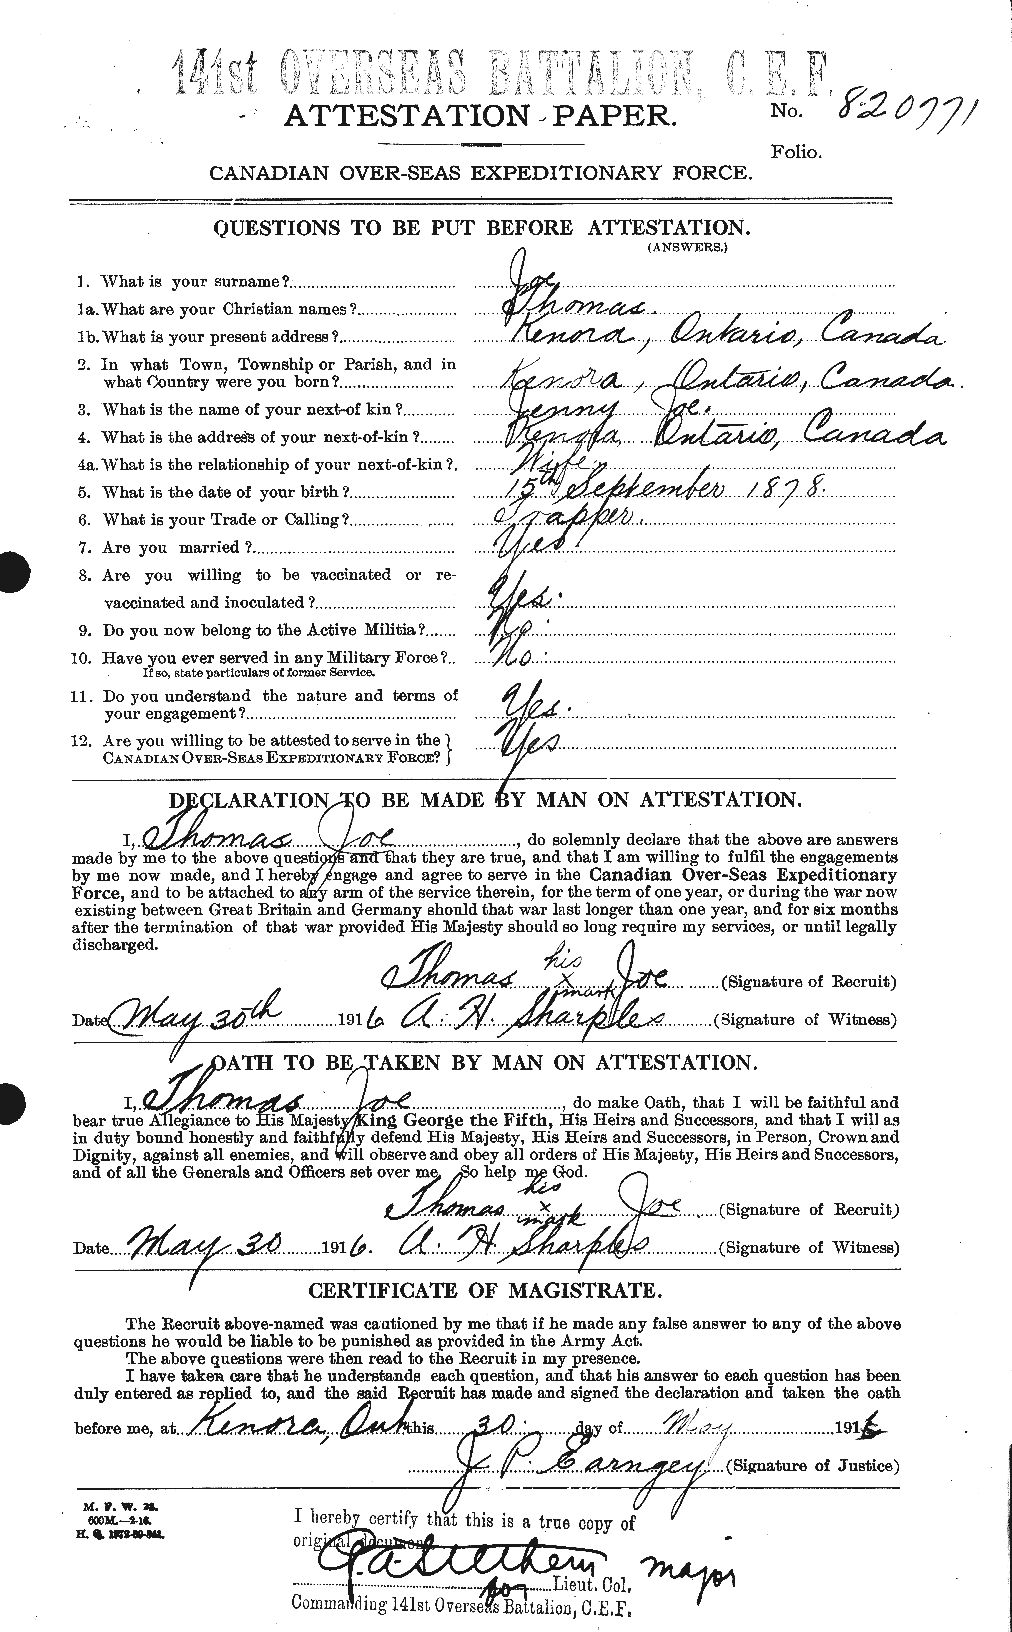 Personnel Records of the First World War - CEF 420125a